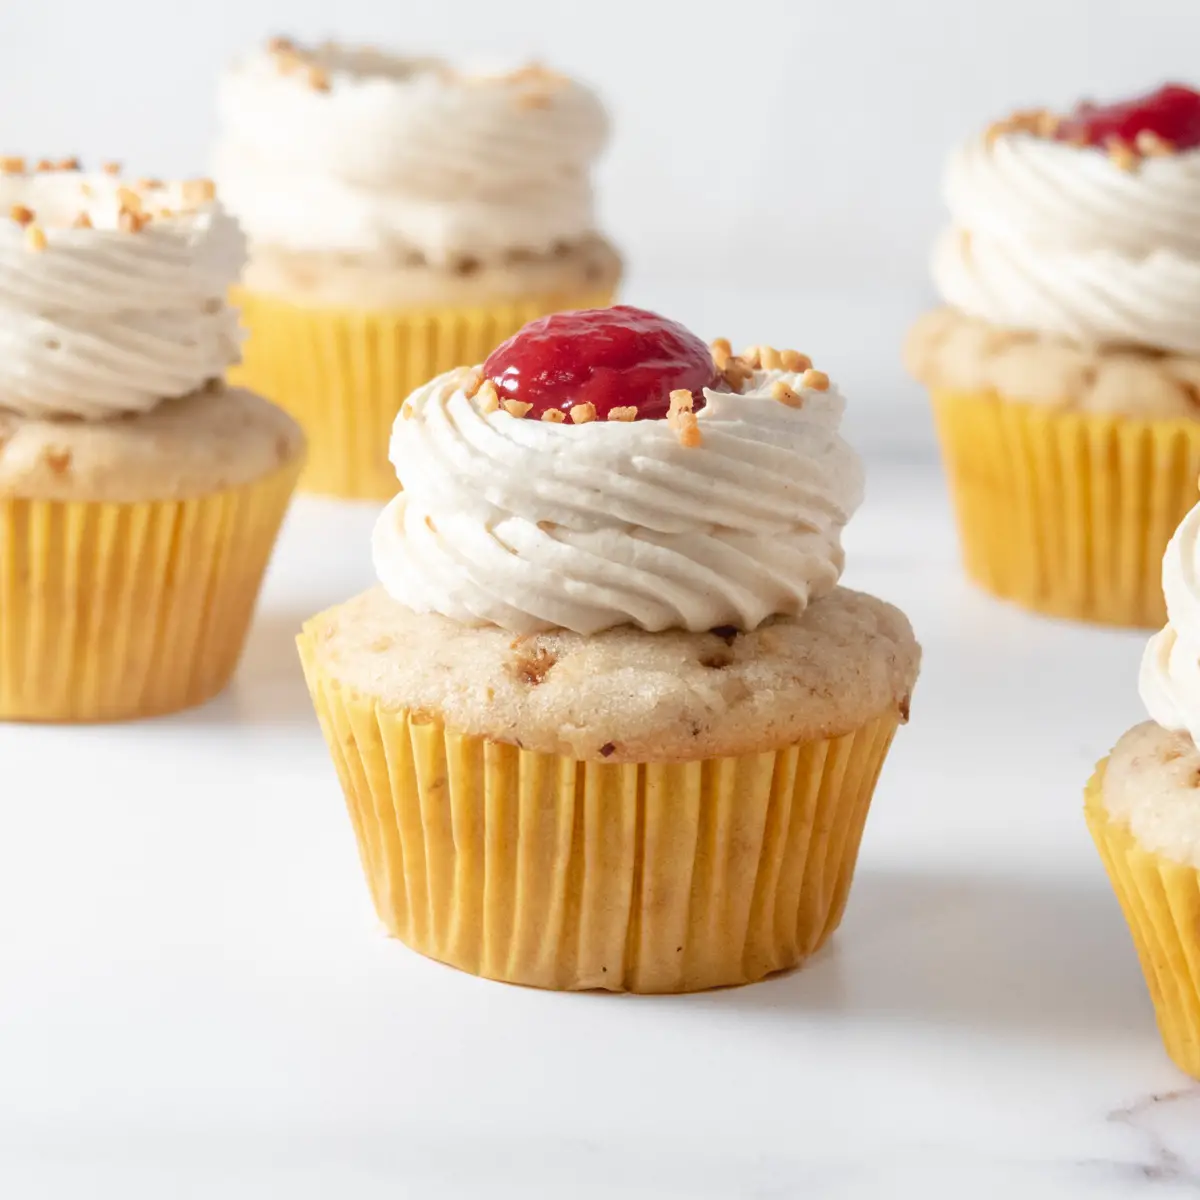 of peanut butter cupcakes, some with raspberry curd on top.